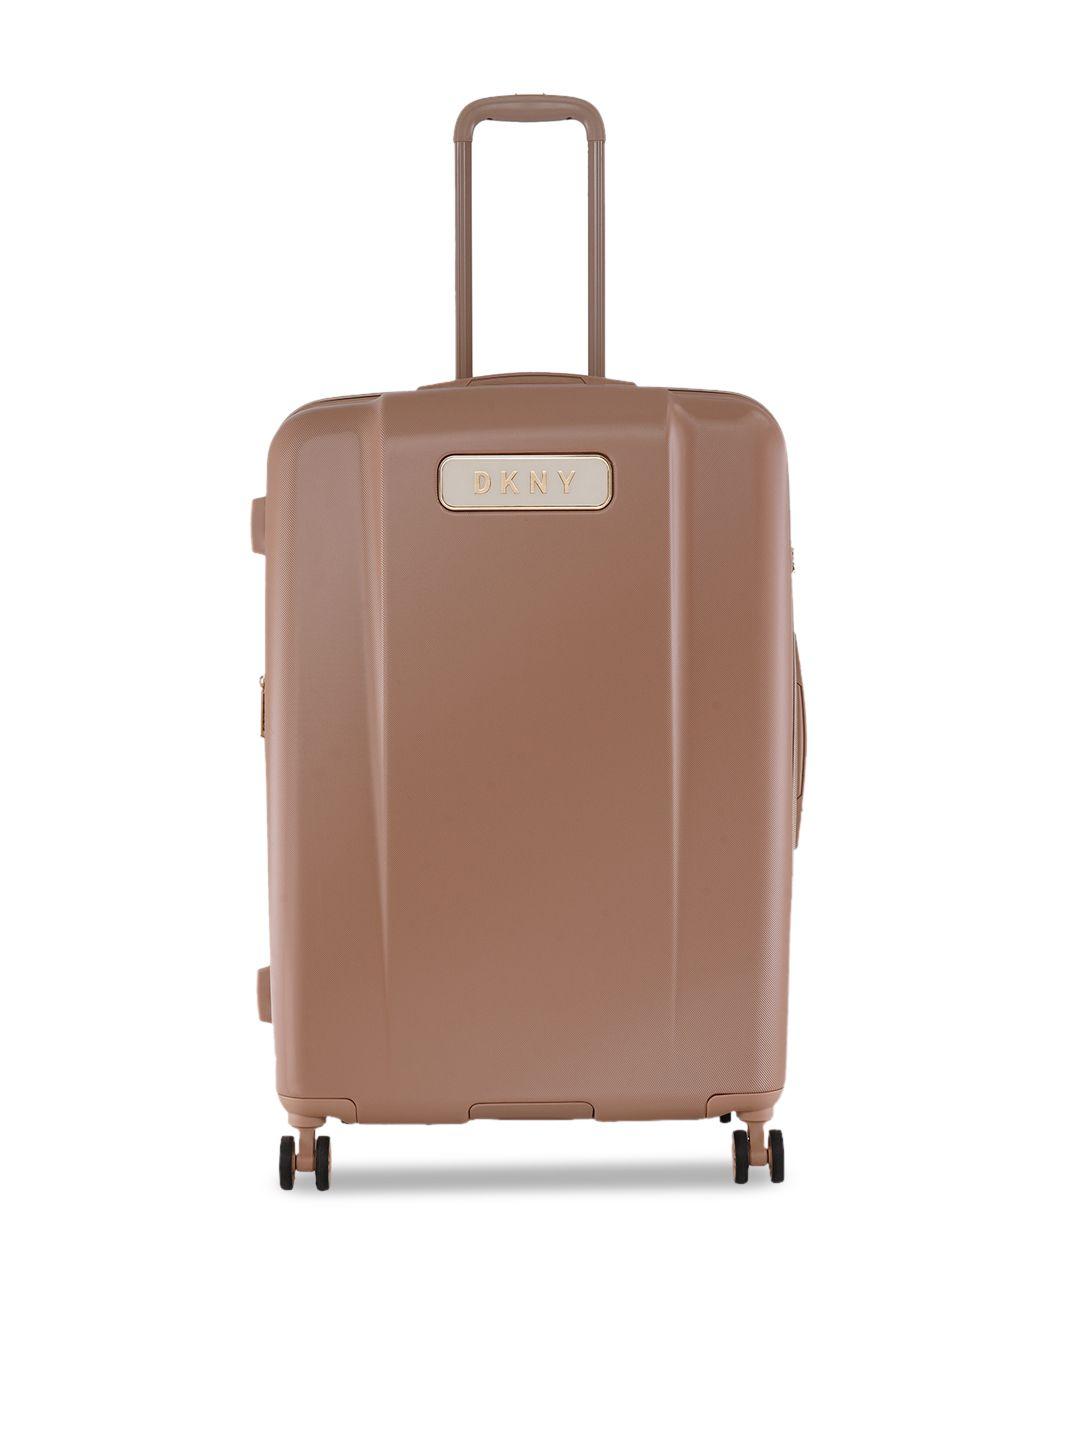 dkny six four one range solid hard side large trolley suitcase